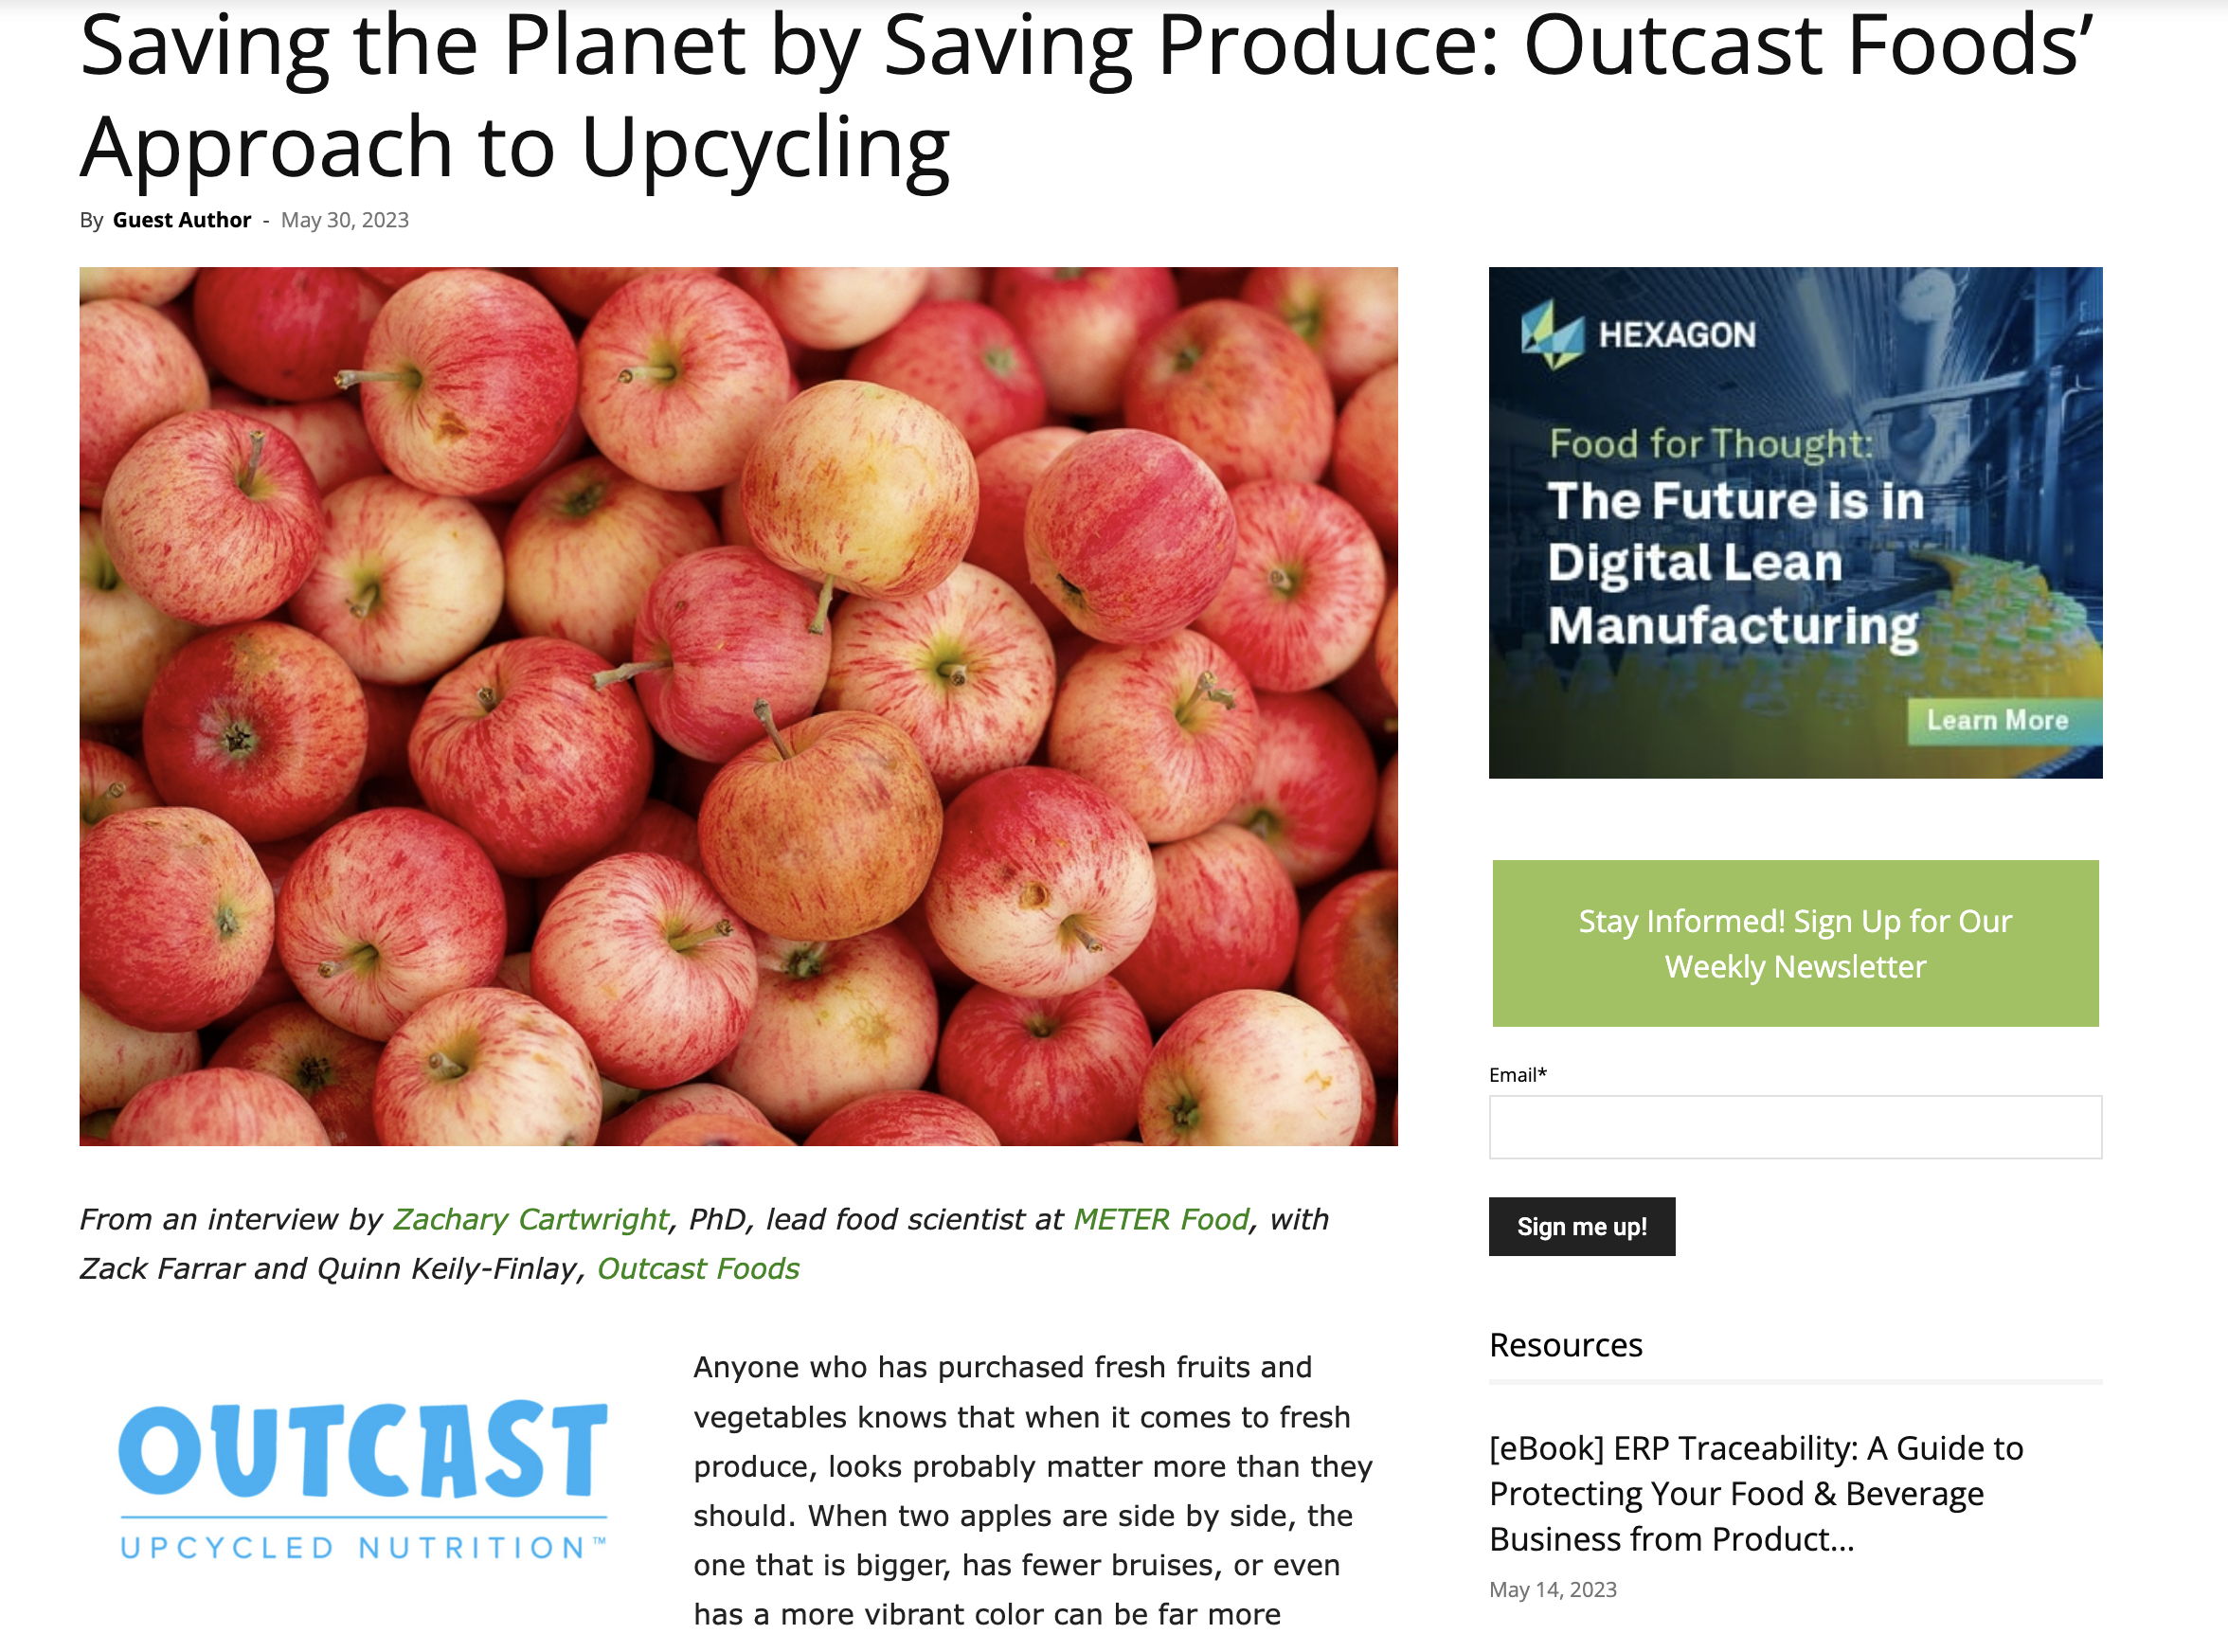 Saving the Planet by Saving Produce: Outcast Foods’ Approach to Upcycling